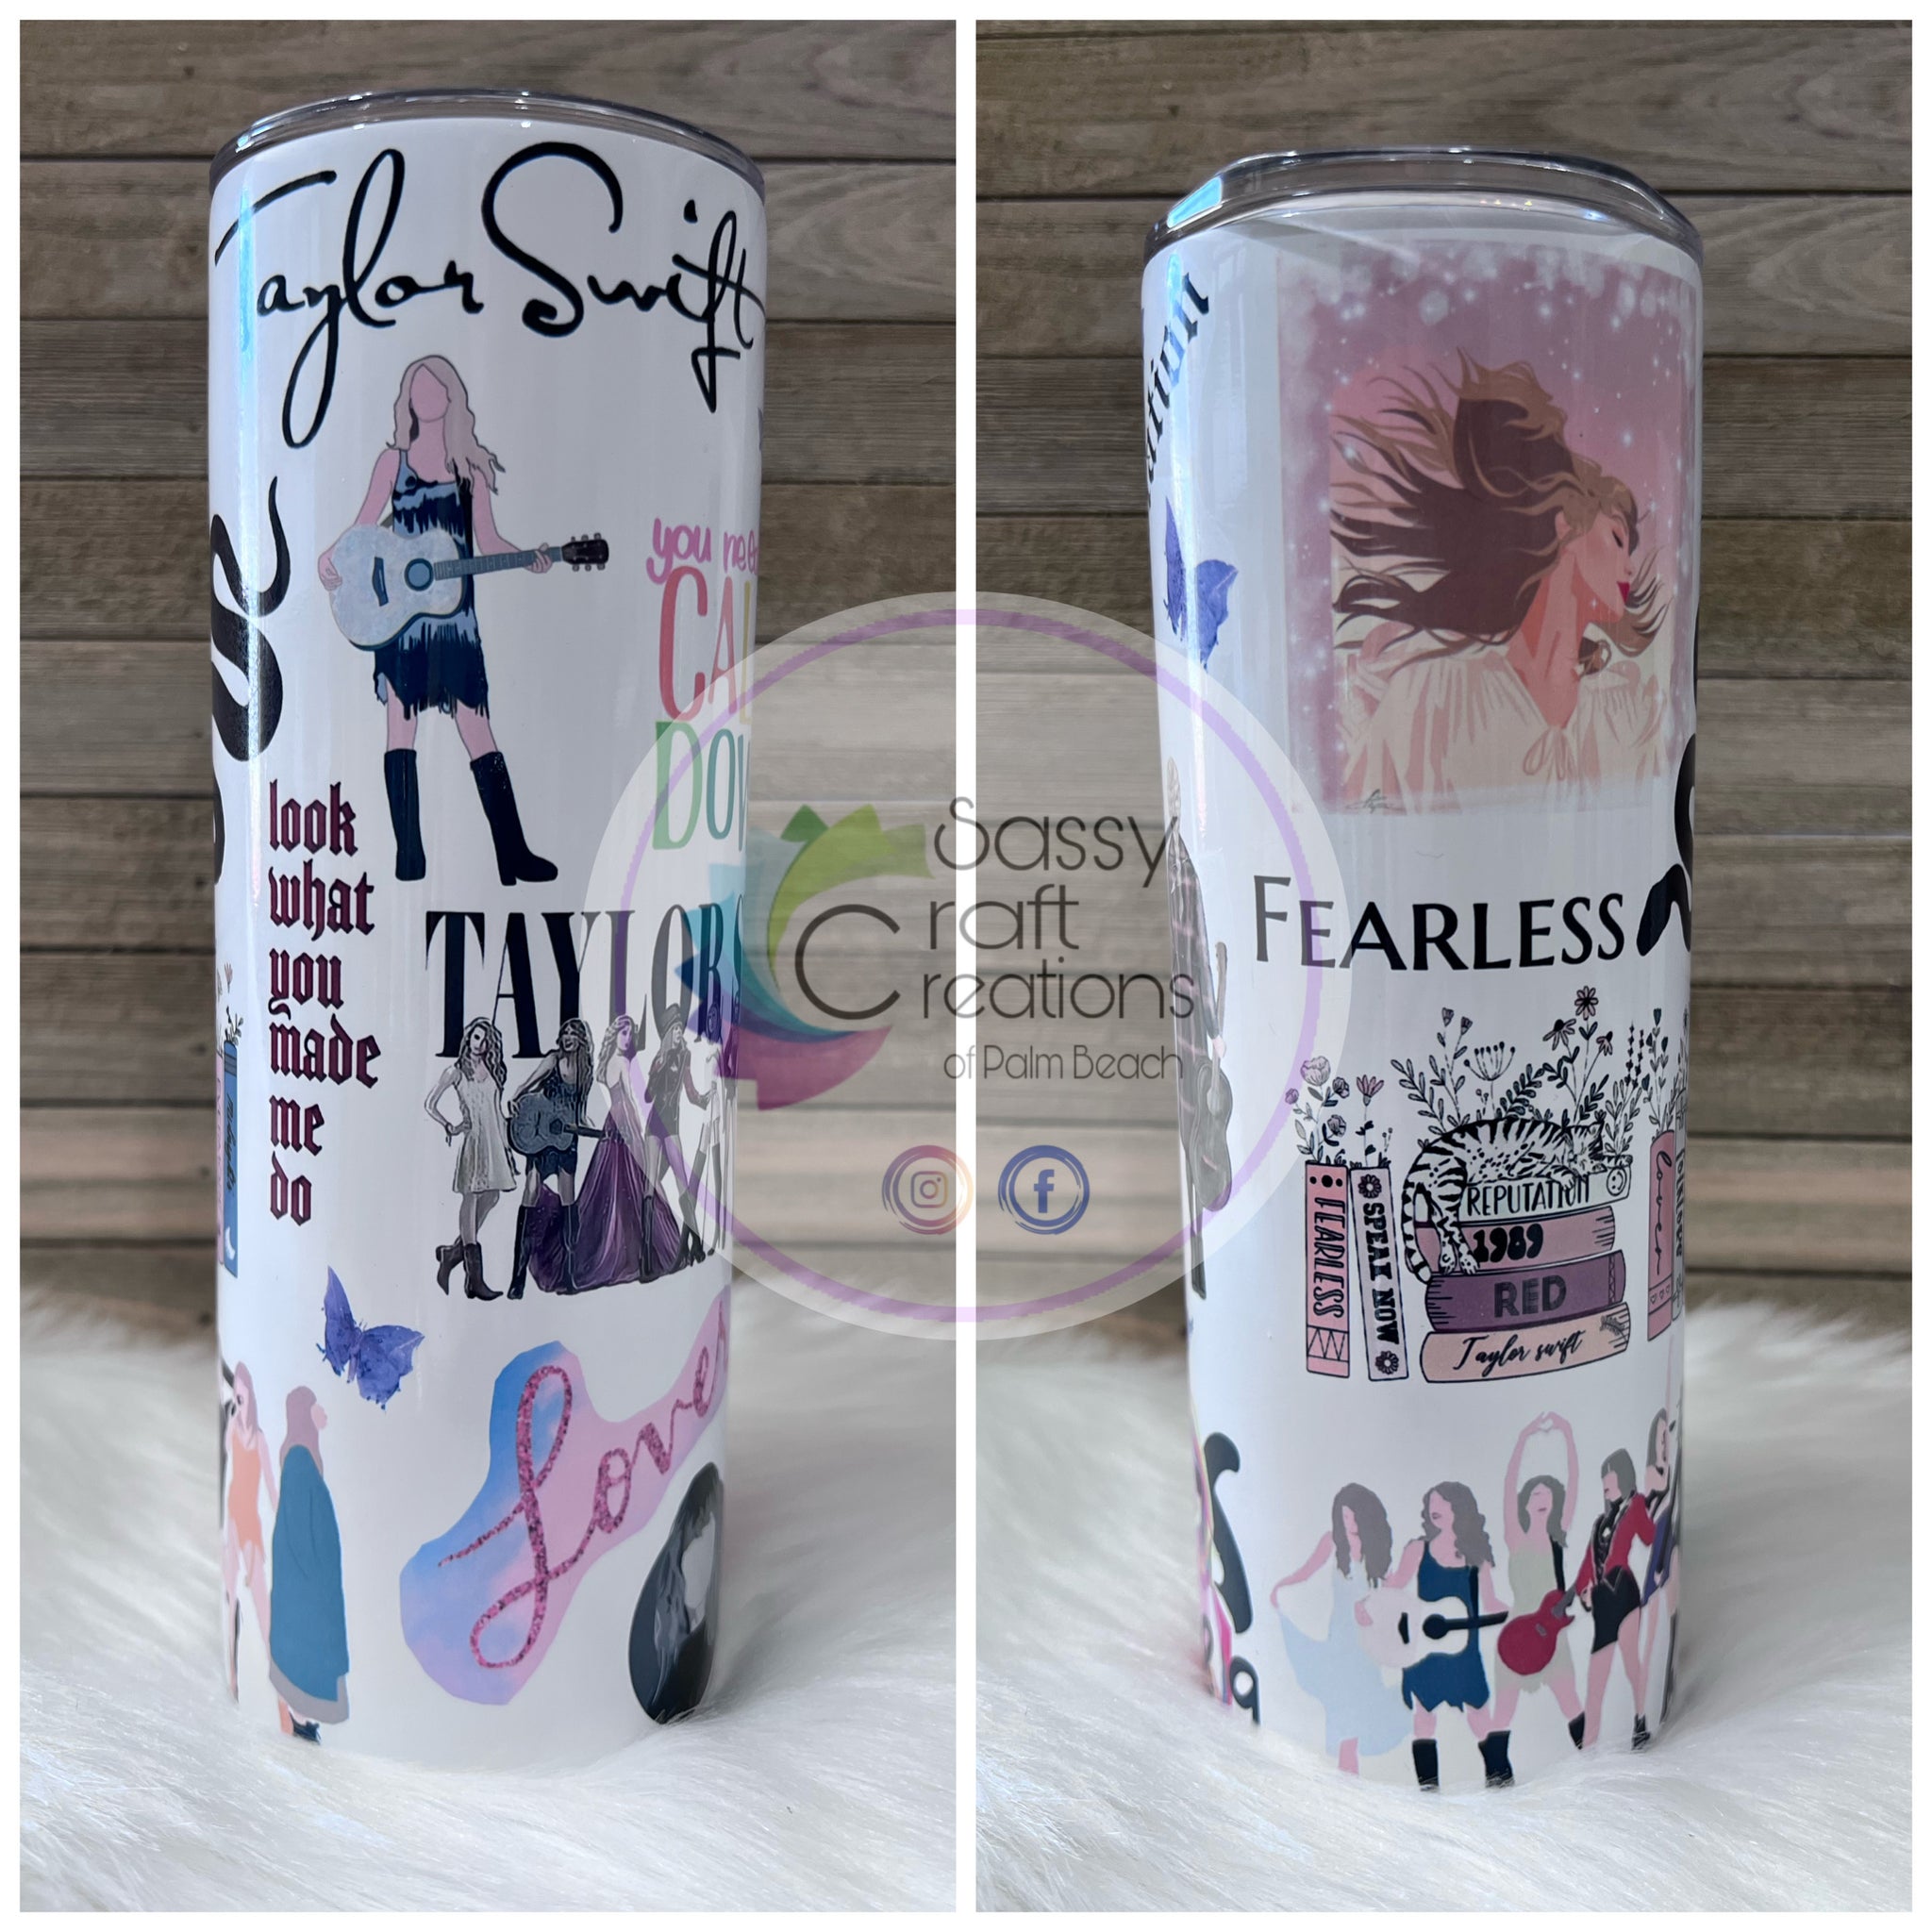 Handmade etched Taylor Swift tumblers - picture is